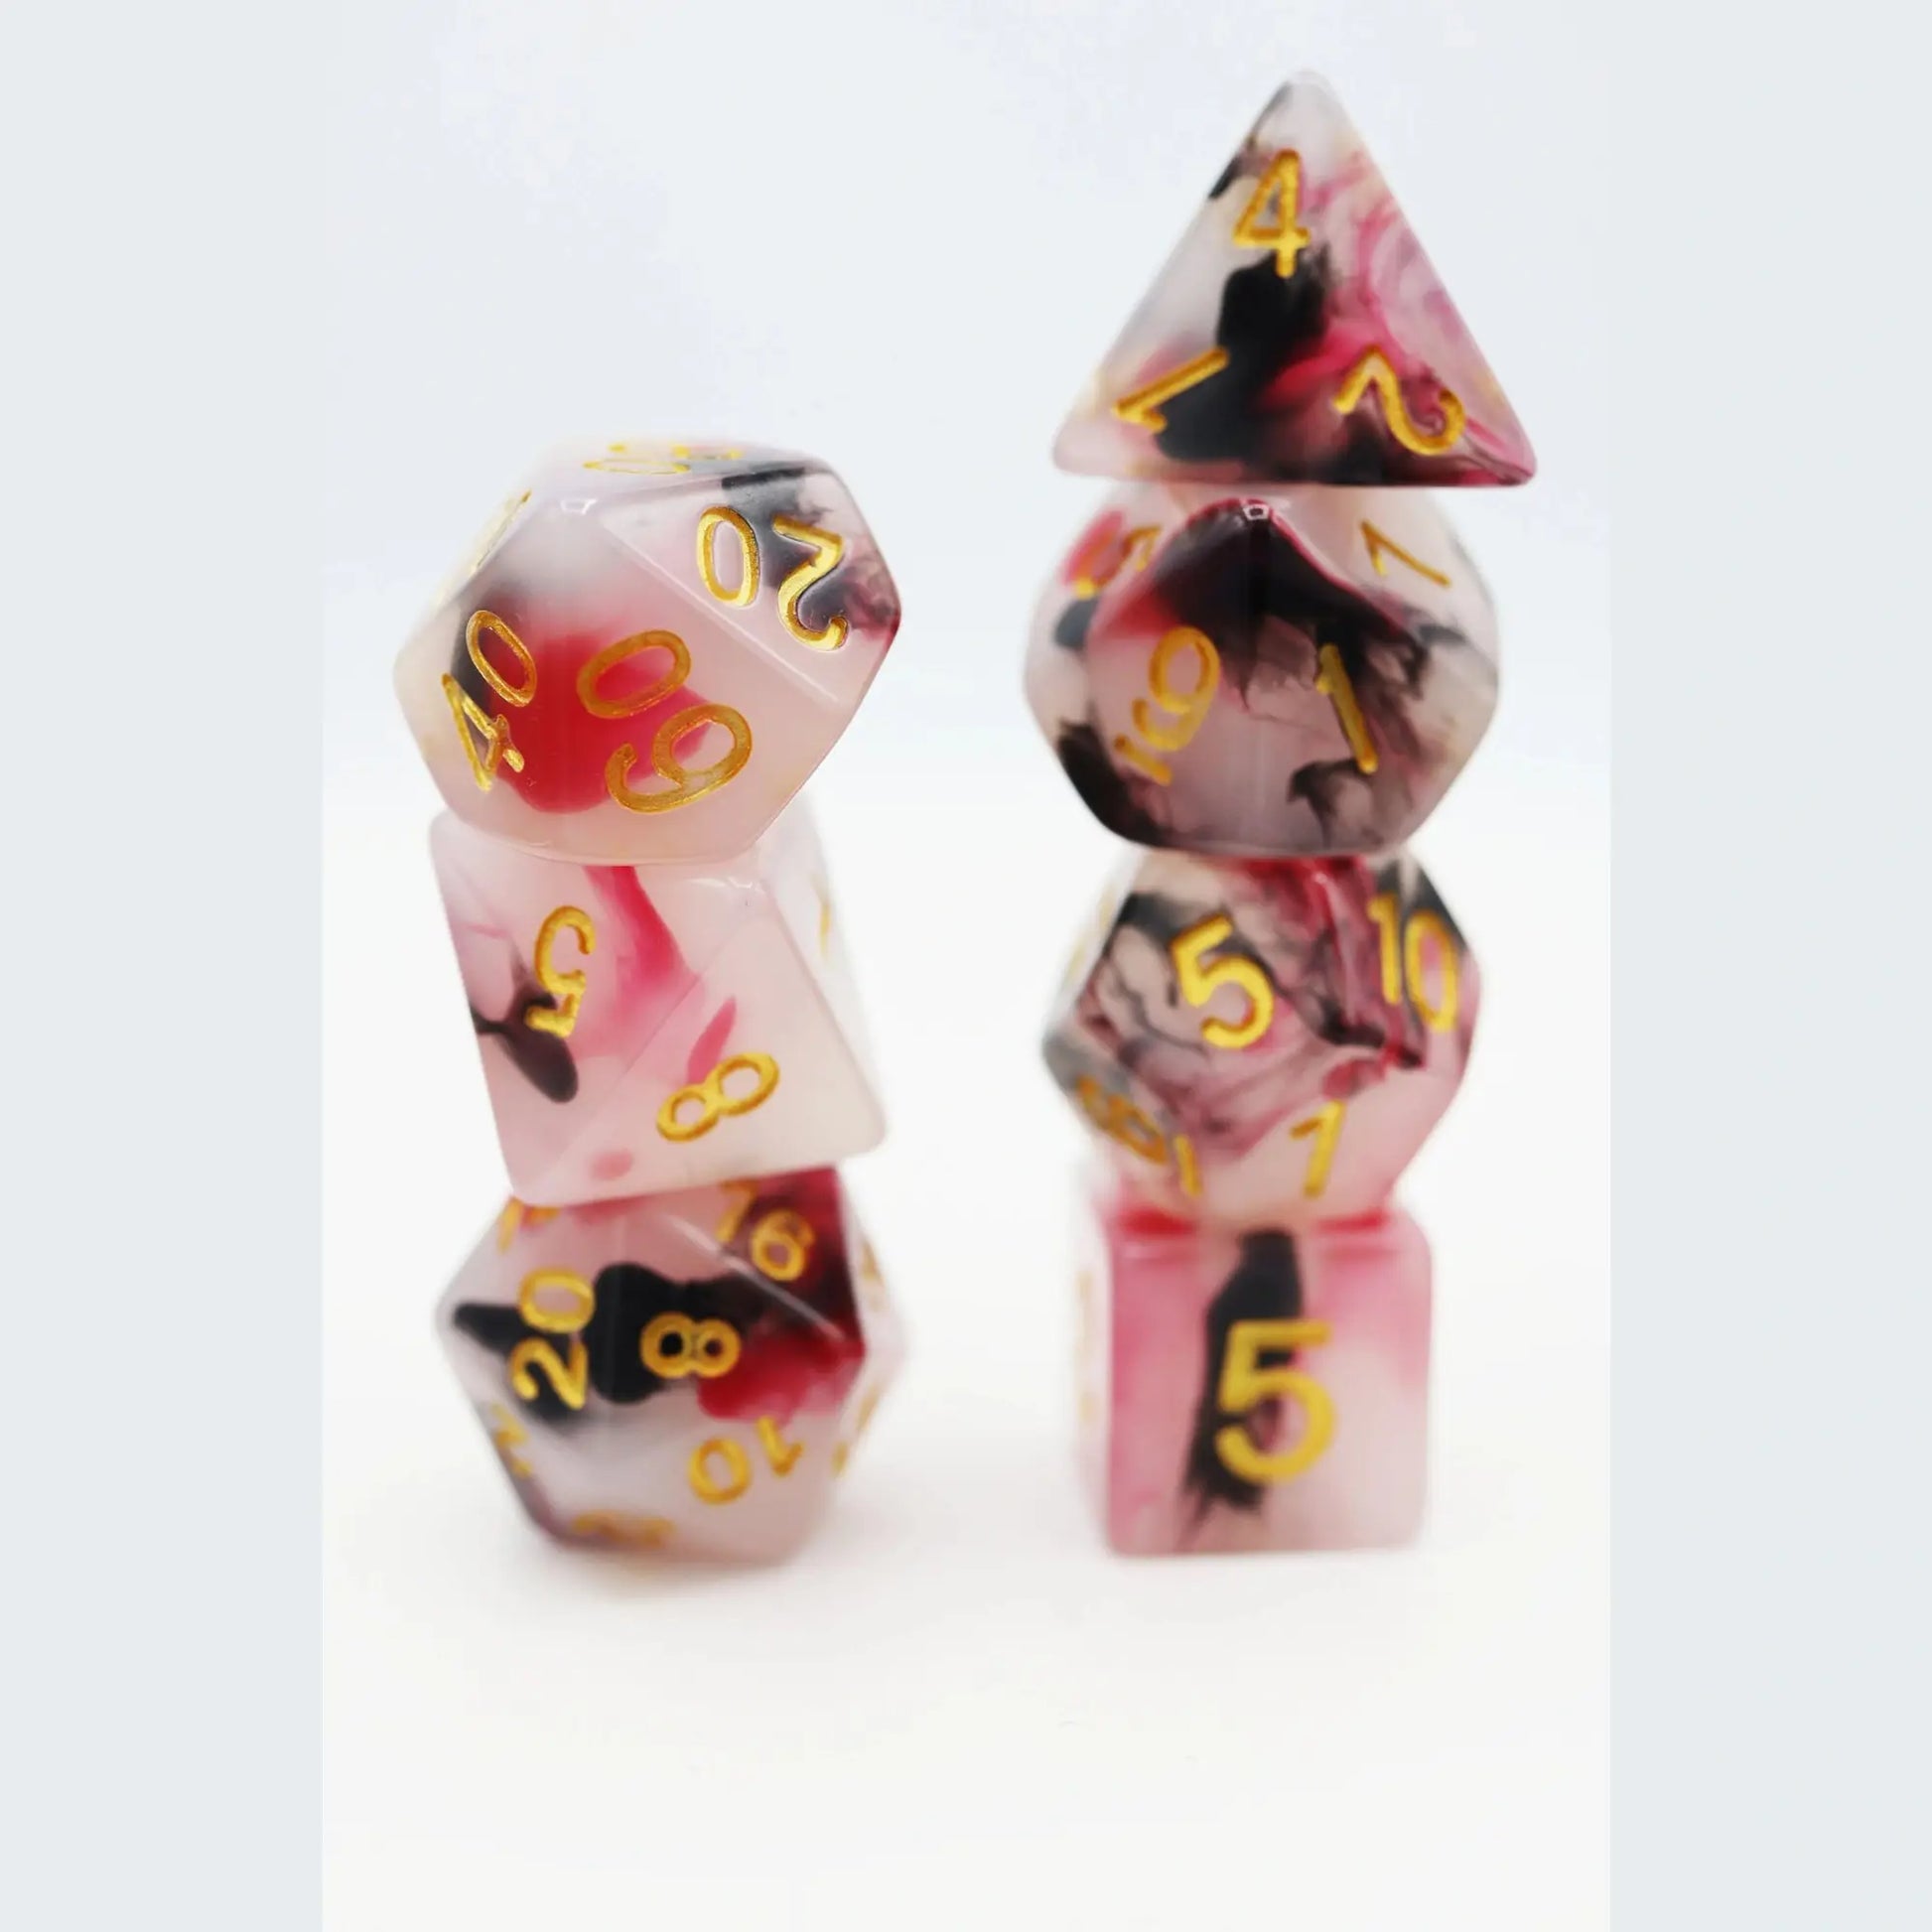 Black and Red Opalescent Jade RPG Dice Set